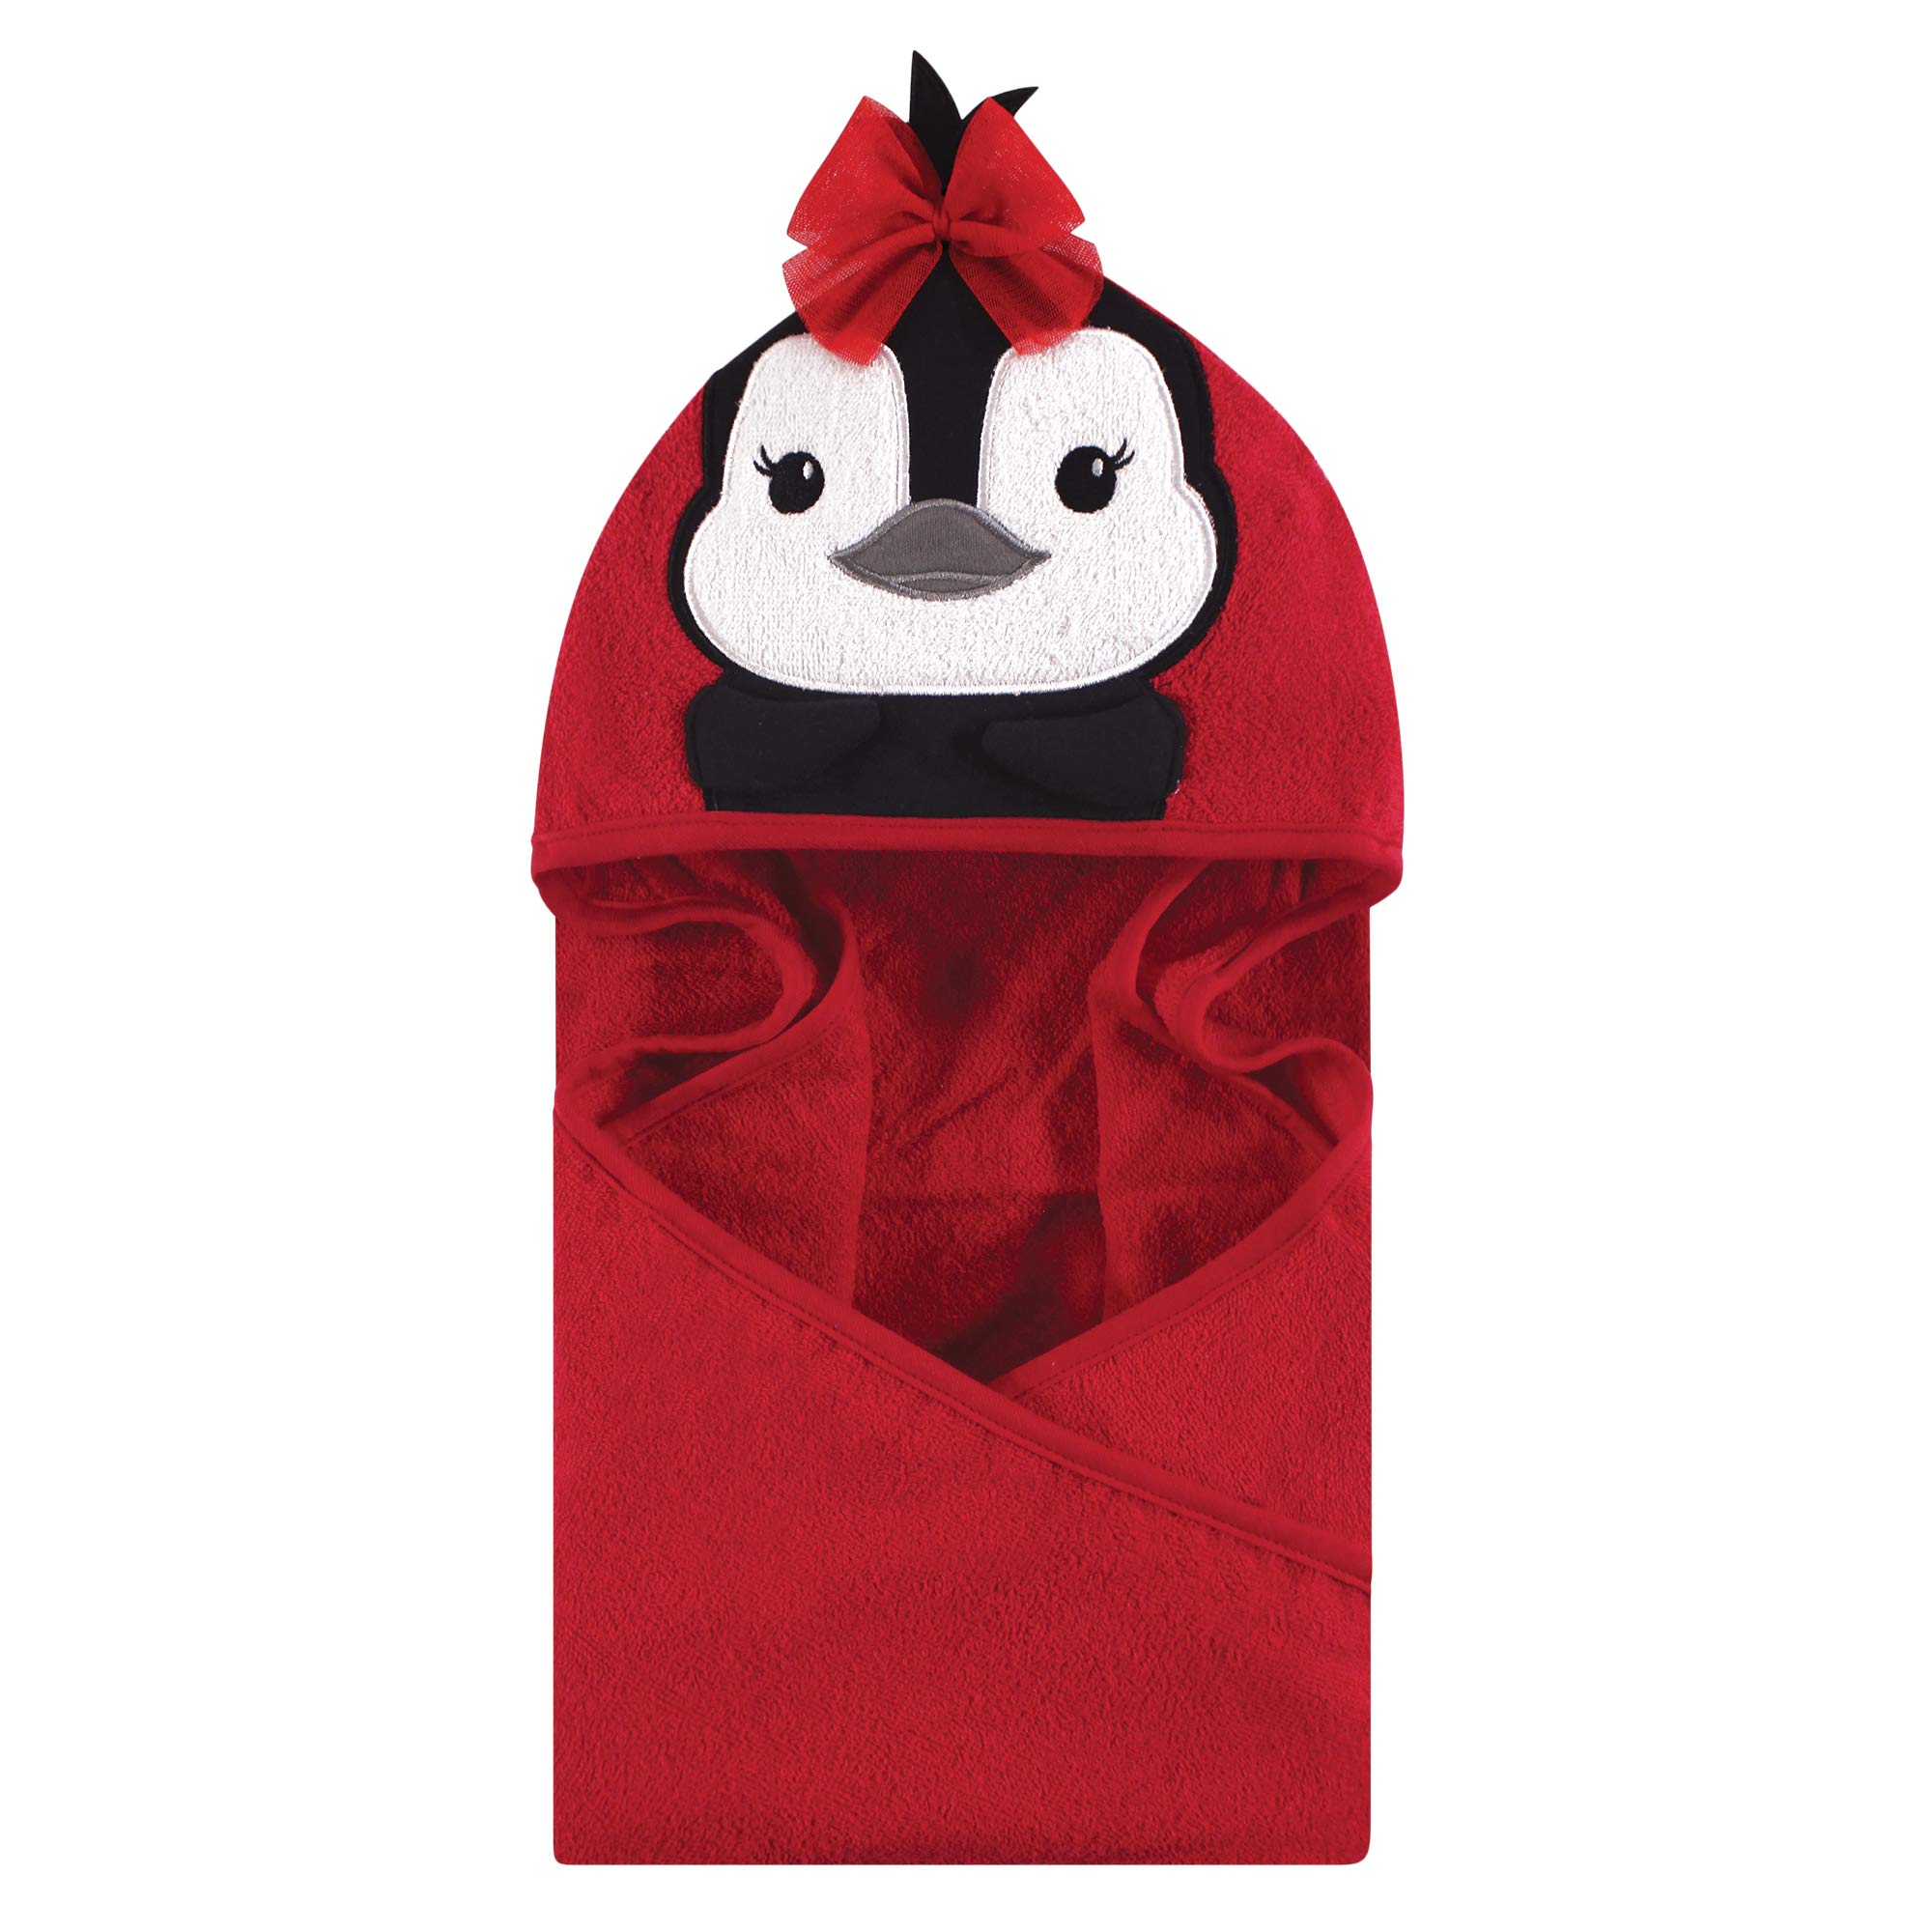 Hudson Baby Unisex Baby Cotton Animal Face Hooded Towel, Red Penguin, One Size